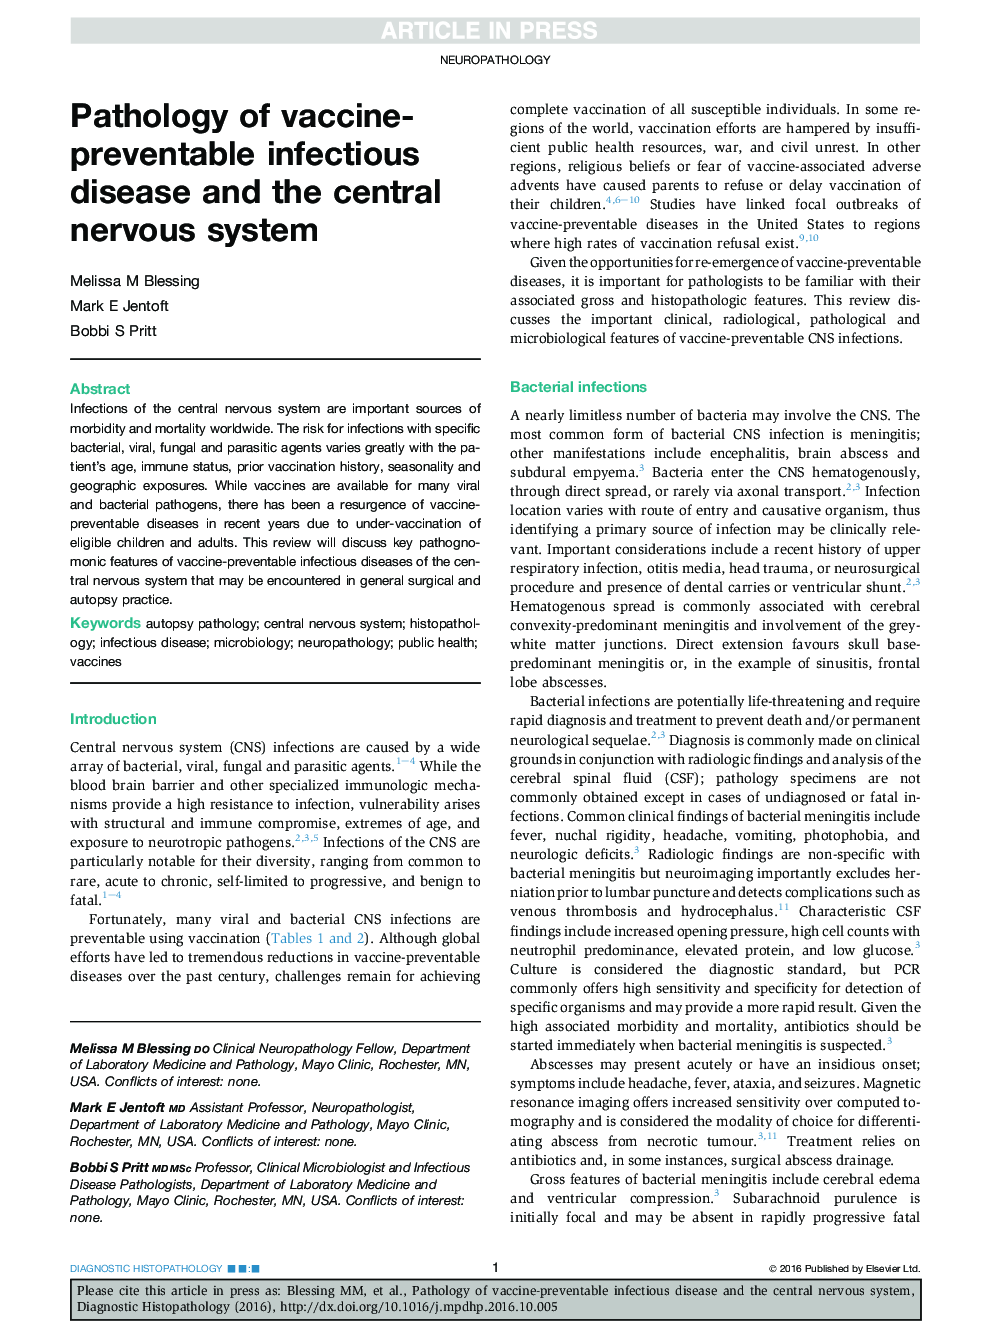 Pathology of vaccine-preventable infectious disease and the central nervous system